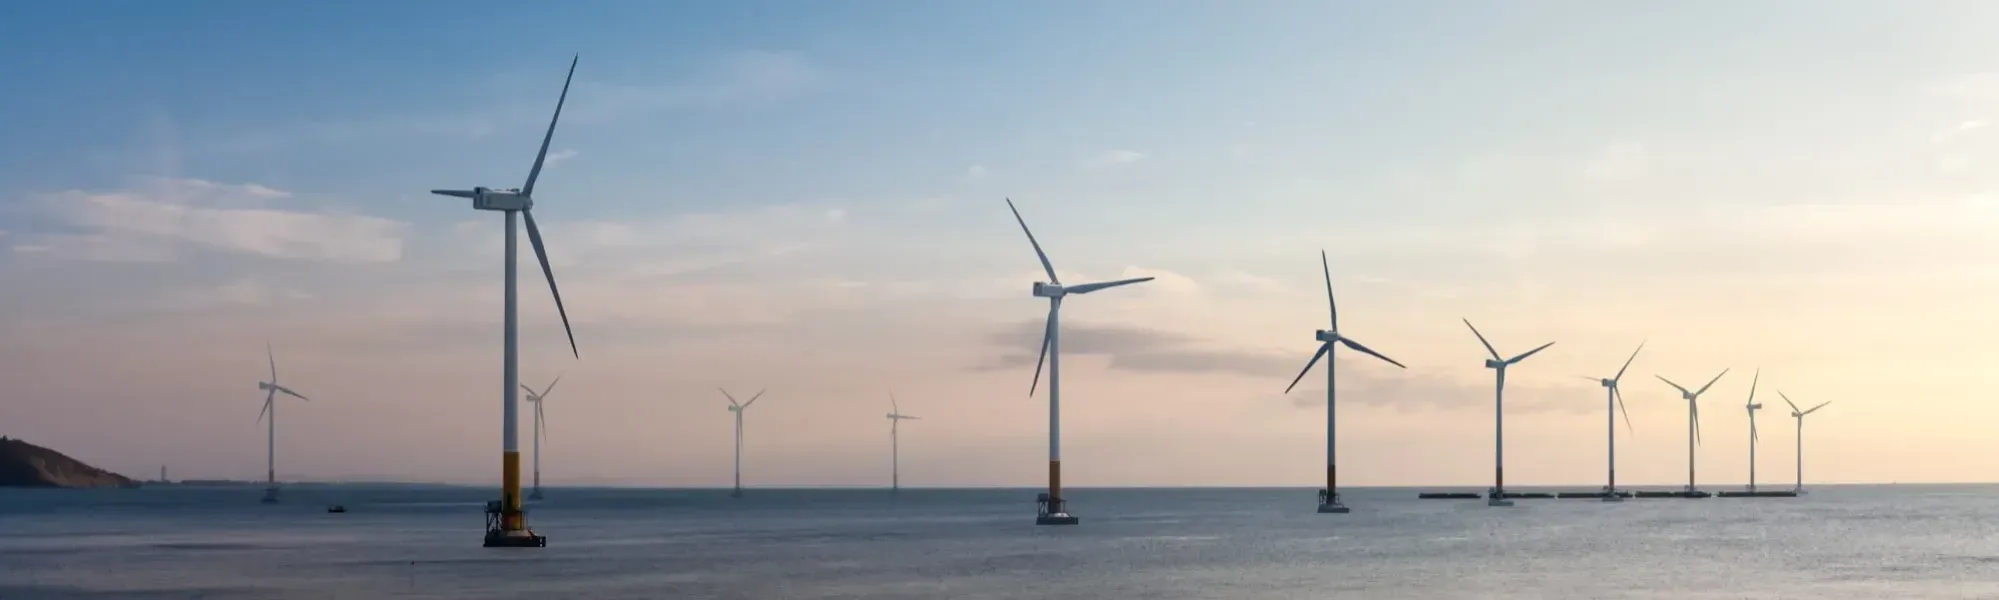 image of wind turbines in the sea at dawn